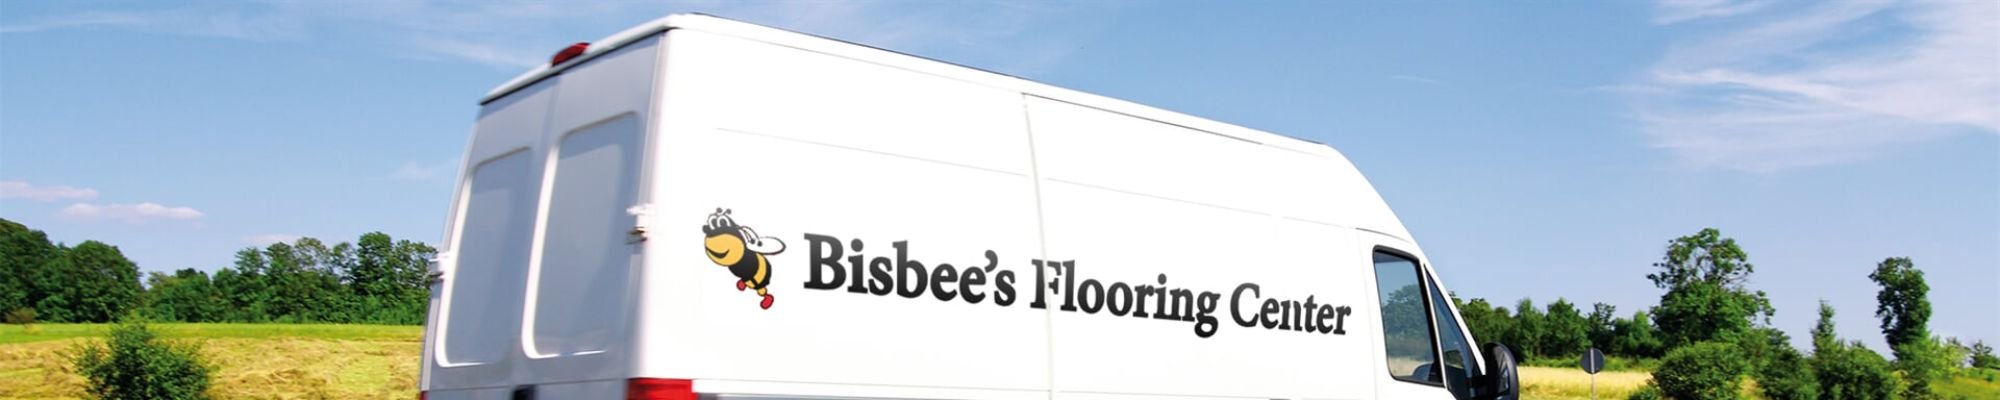 Bisbee's Flooring Center van for shop-at-home calls in McFarland, and Sun Prairie WI